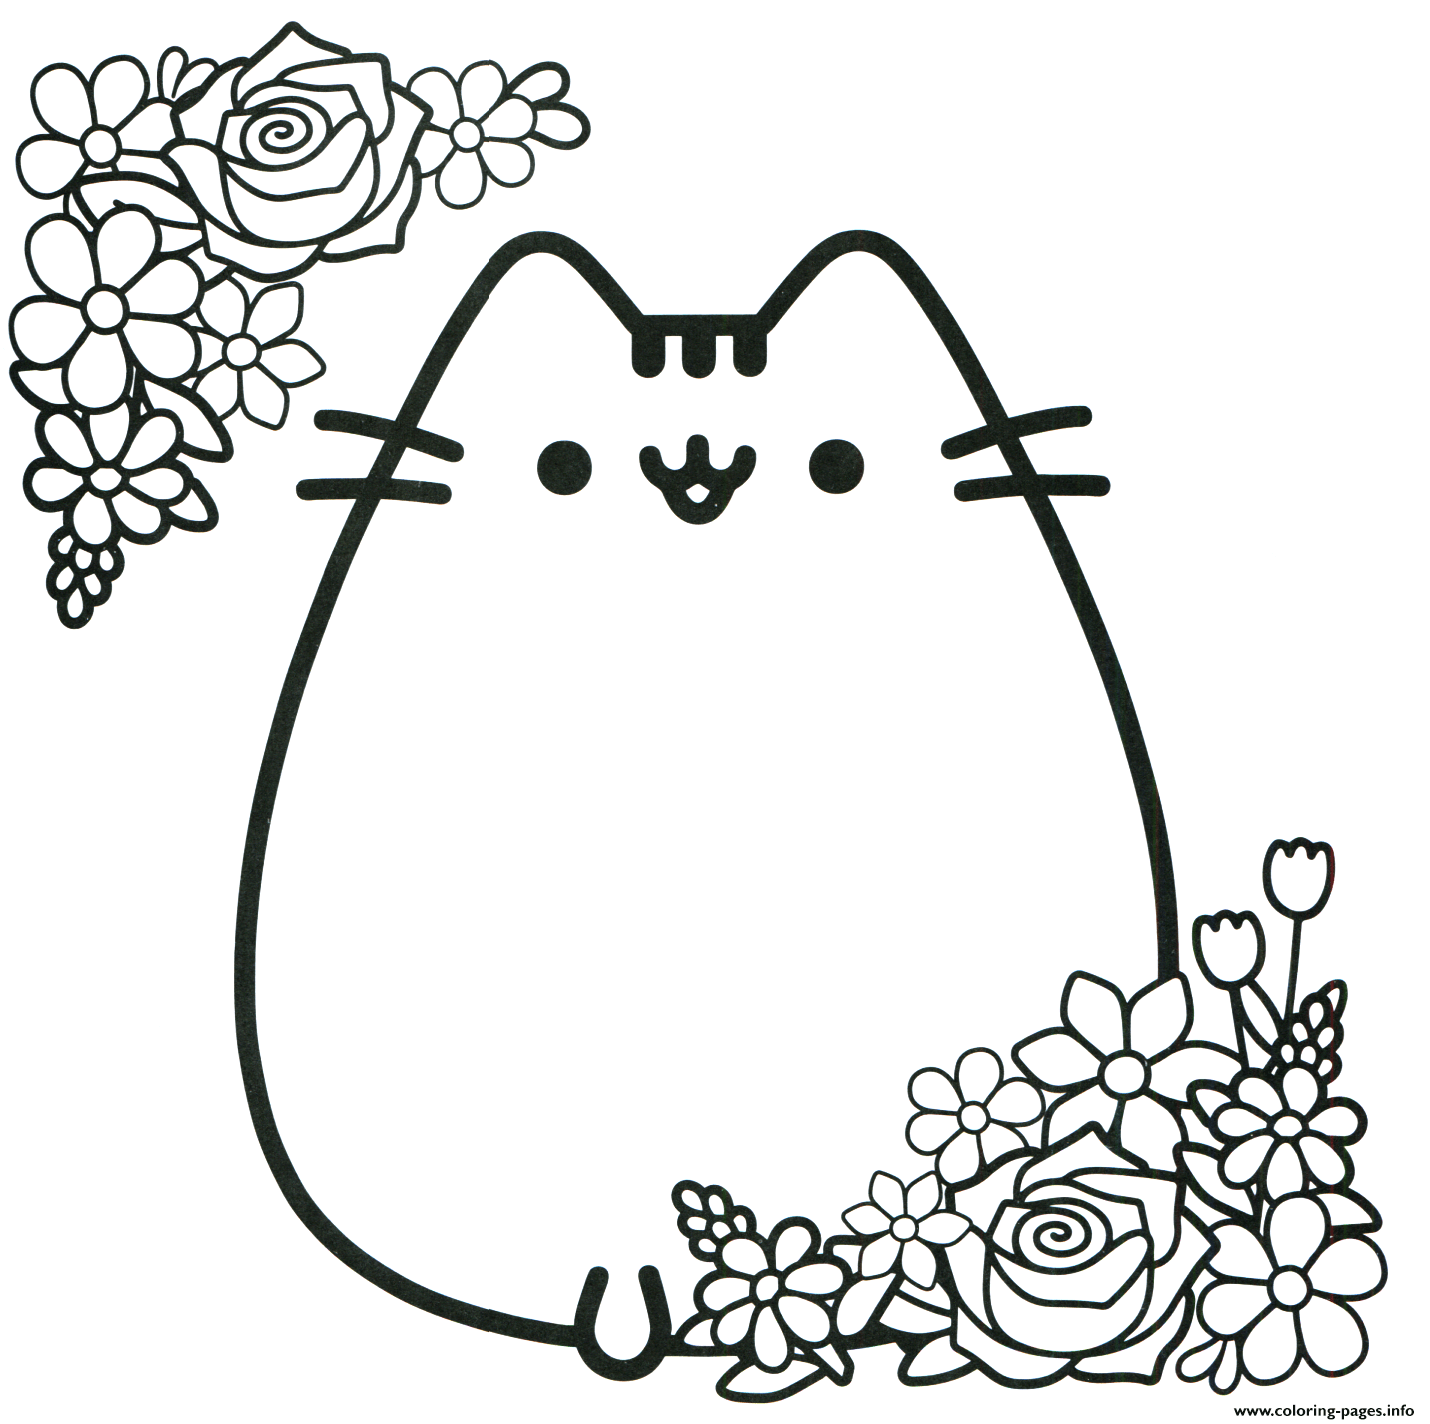 Remarkable Pusheen Pdf Photo Coloring Pages